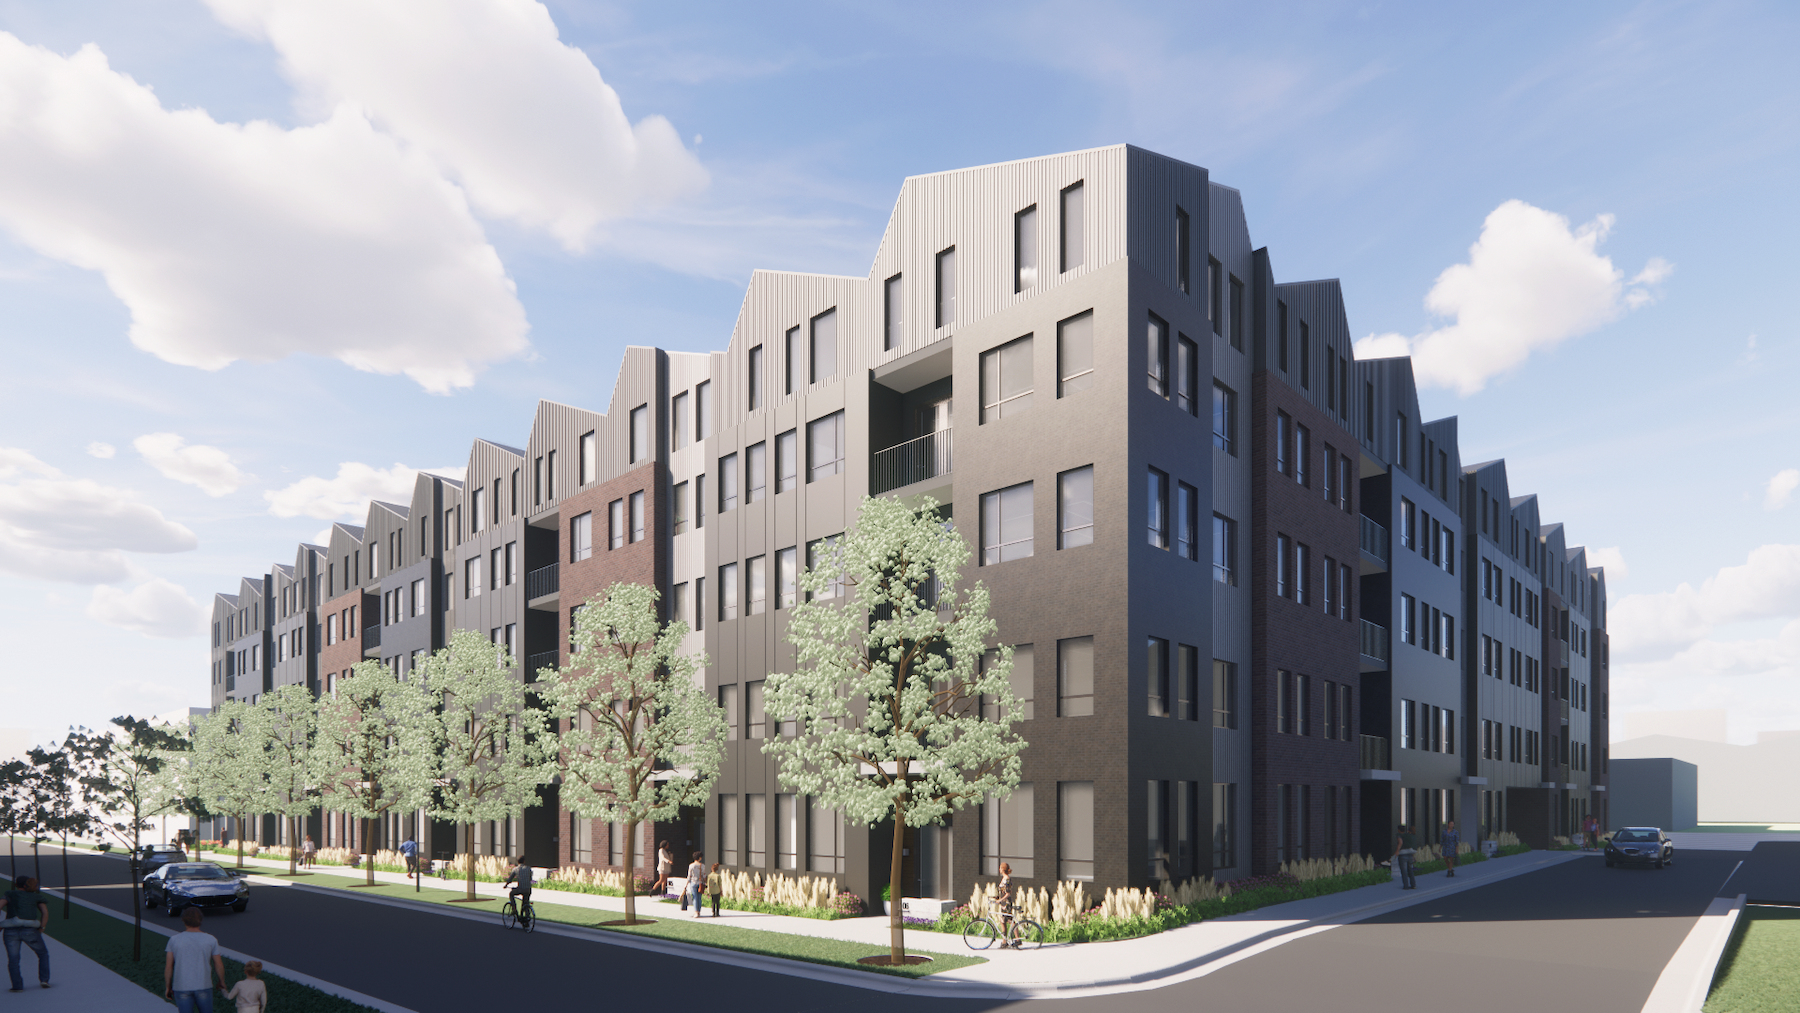 Rendering of Columbus Apartments, designed by Rhode Partners